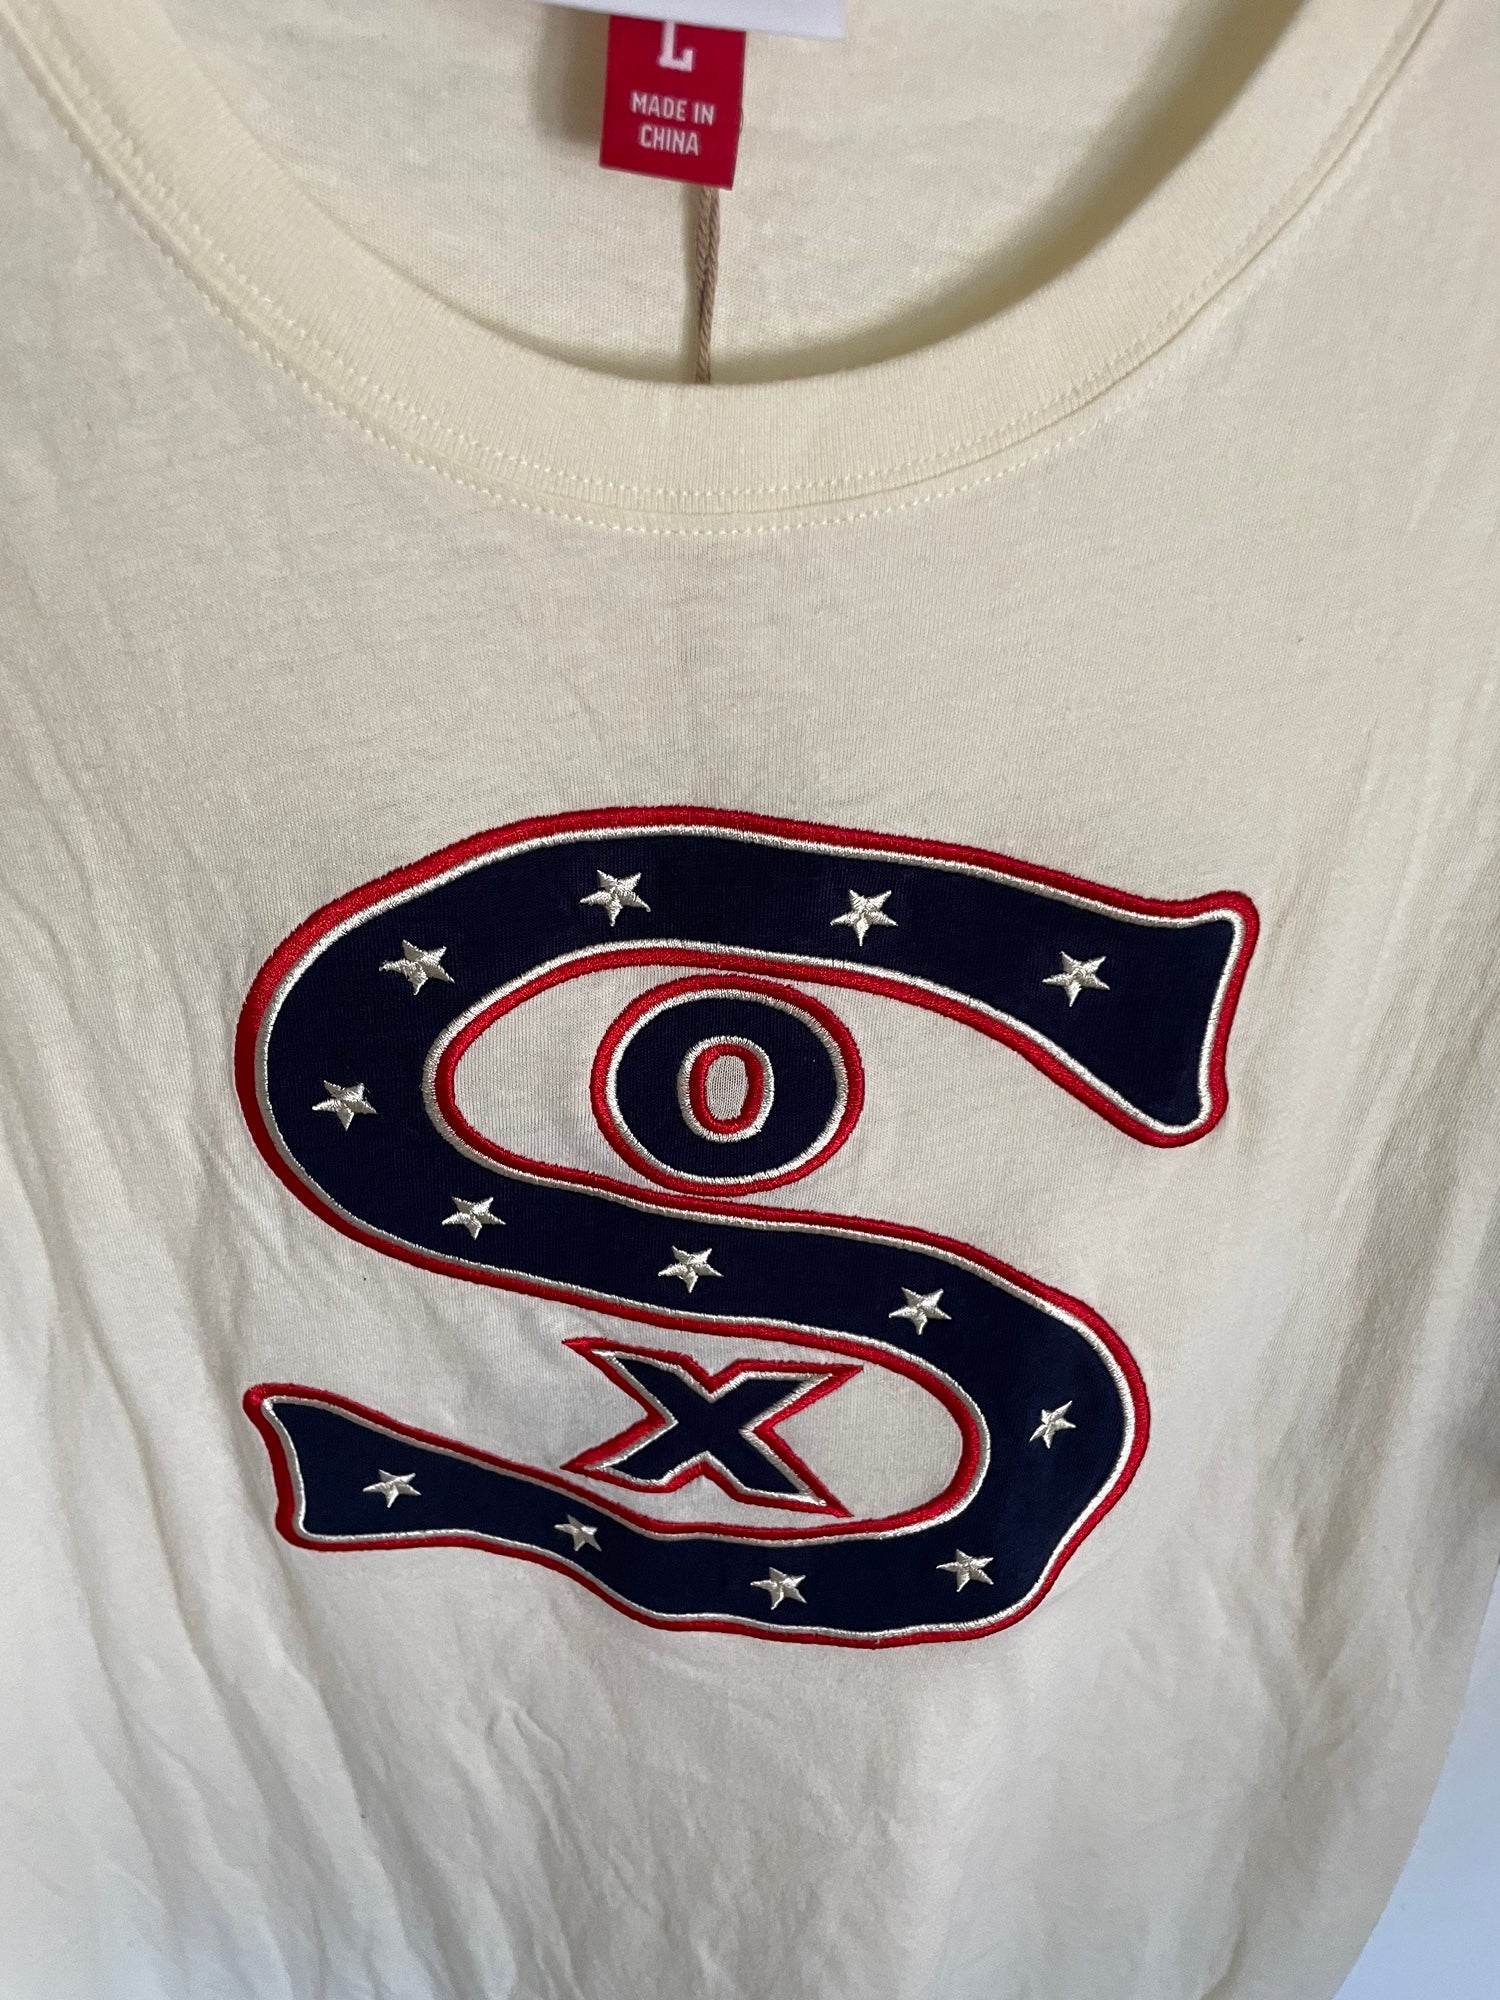 Mitchell & Ness 1917 Authentic Jersey Chicago White Sox